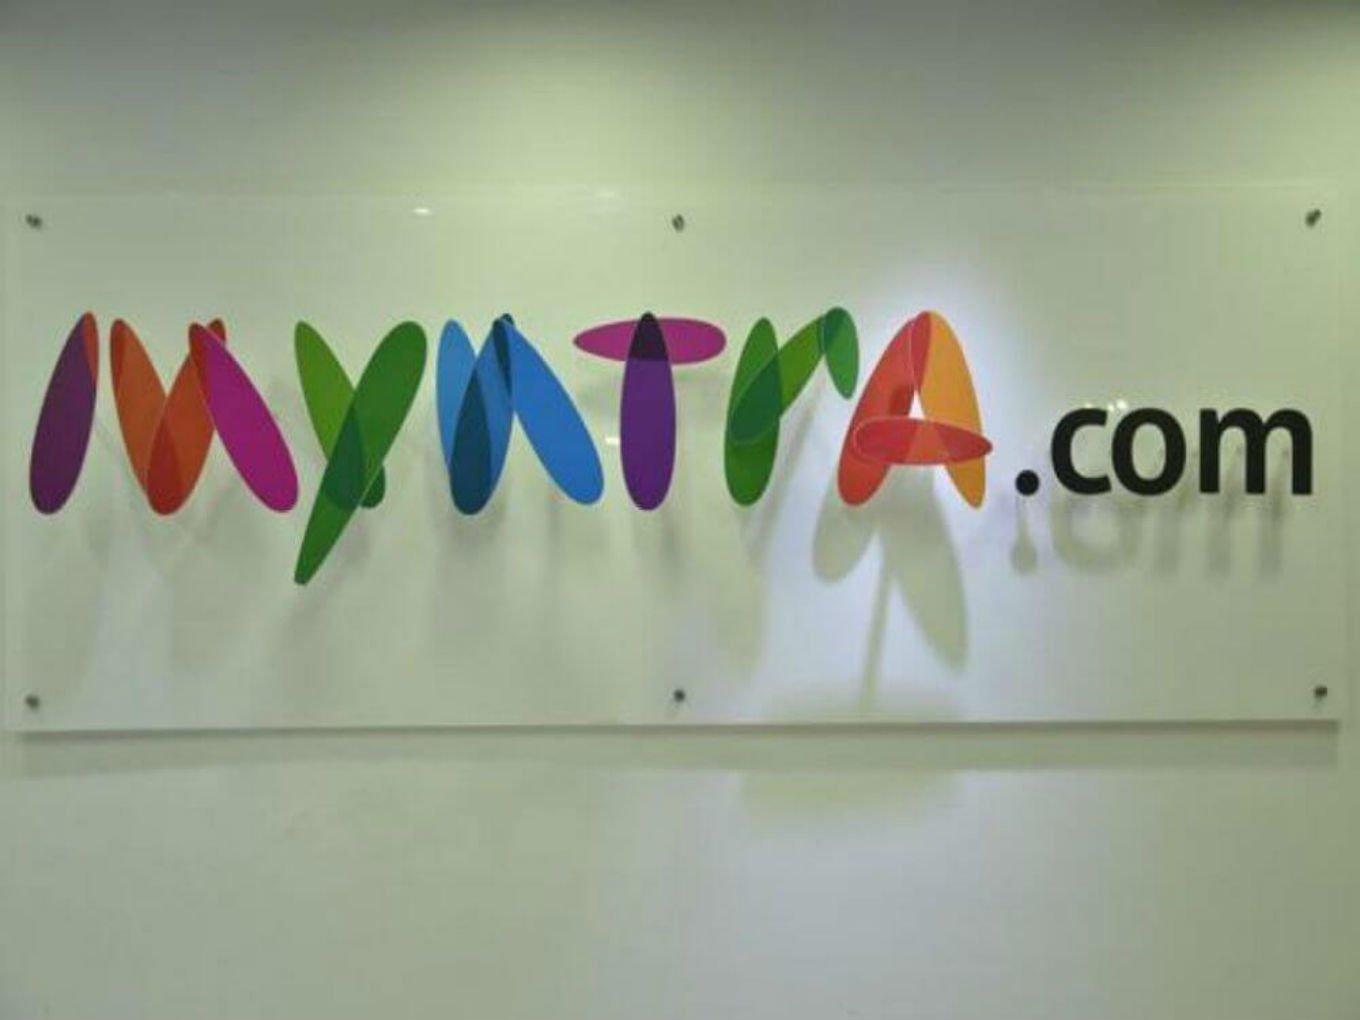 Myntra Hits Annual Run Rate Of $2 Bn GMV: Sources